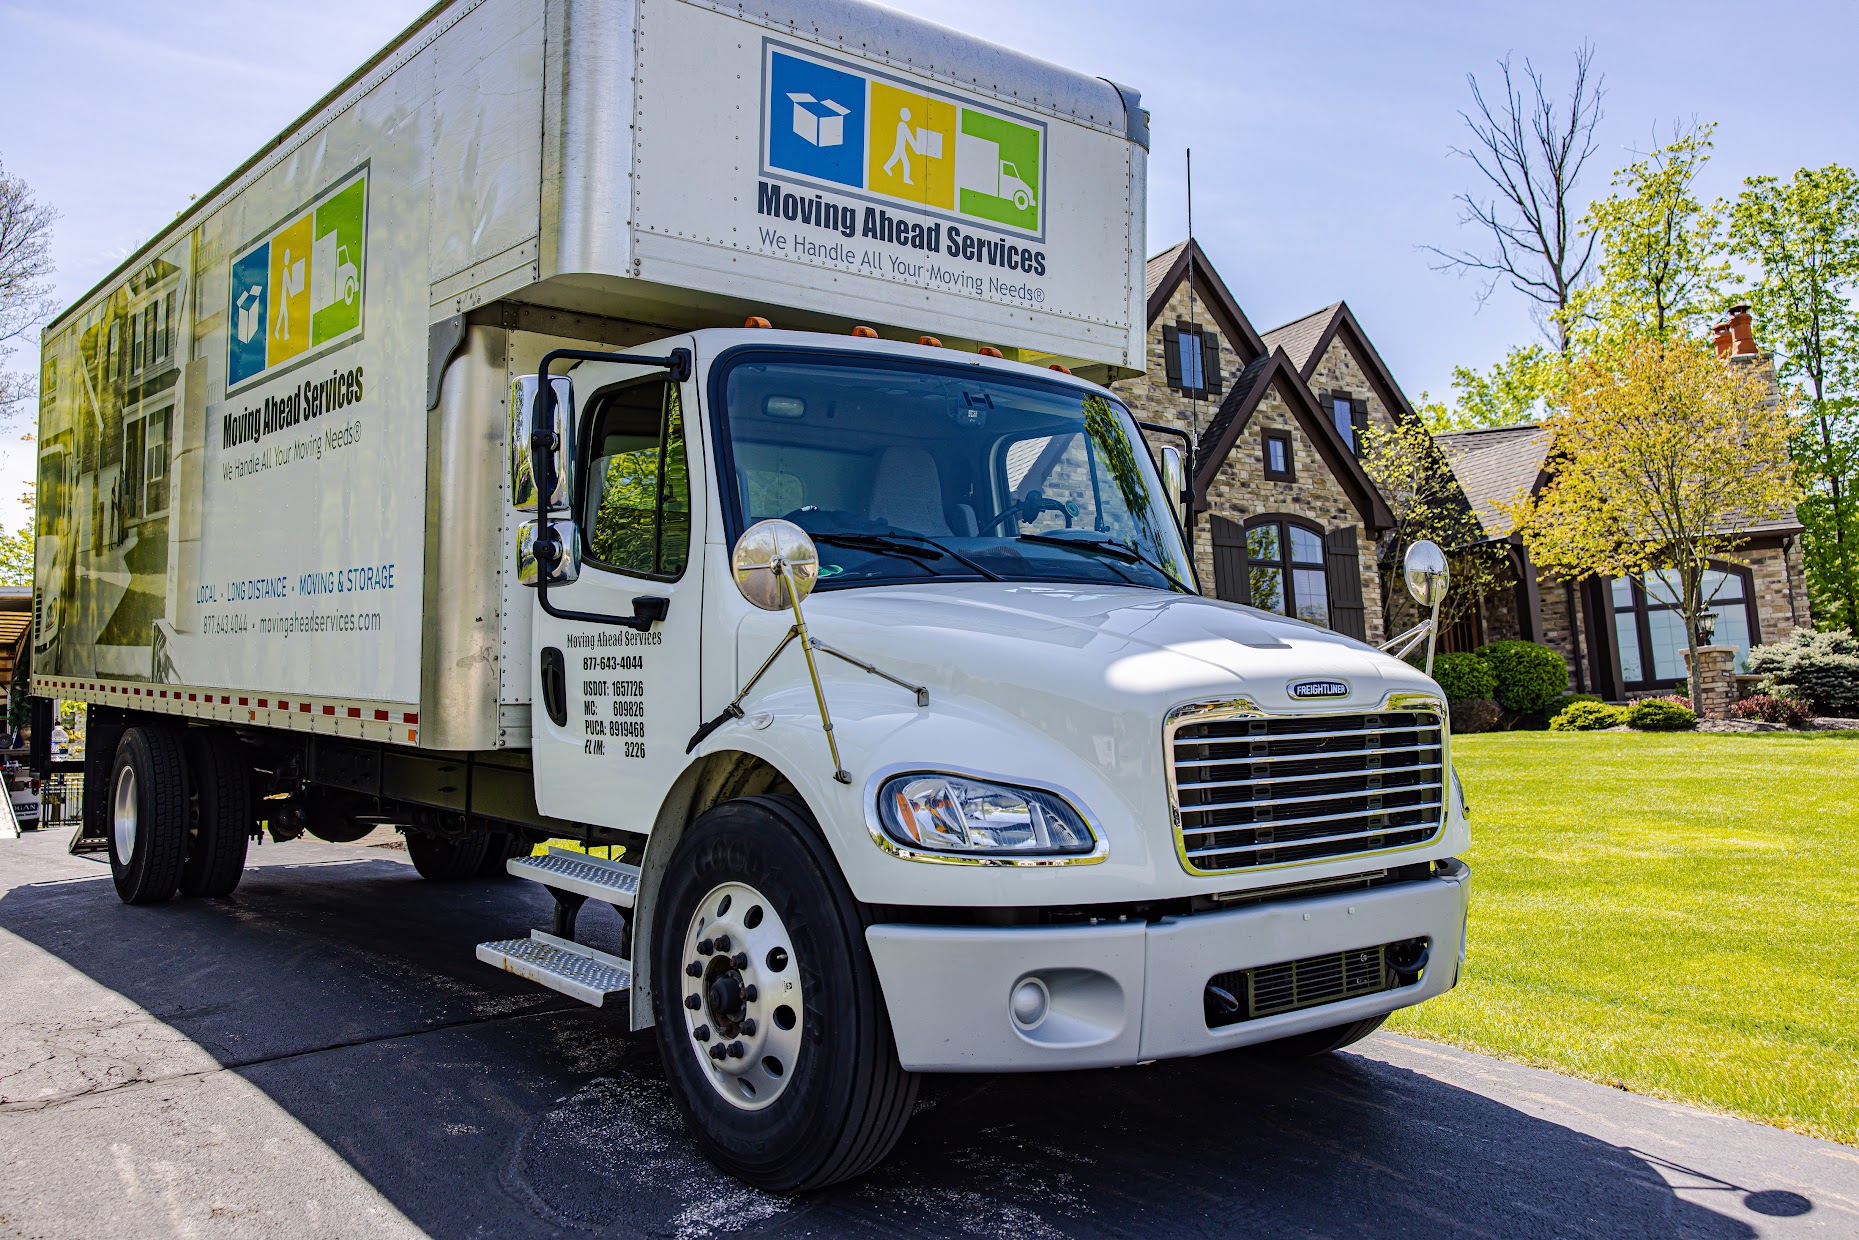 Discover Trusted Movers Nearby with Moving Ahead Services